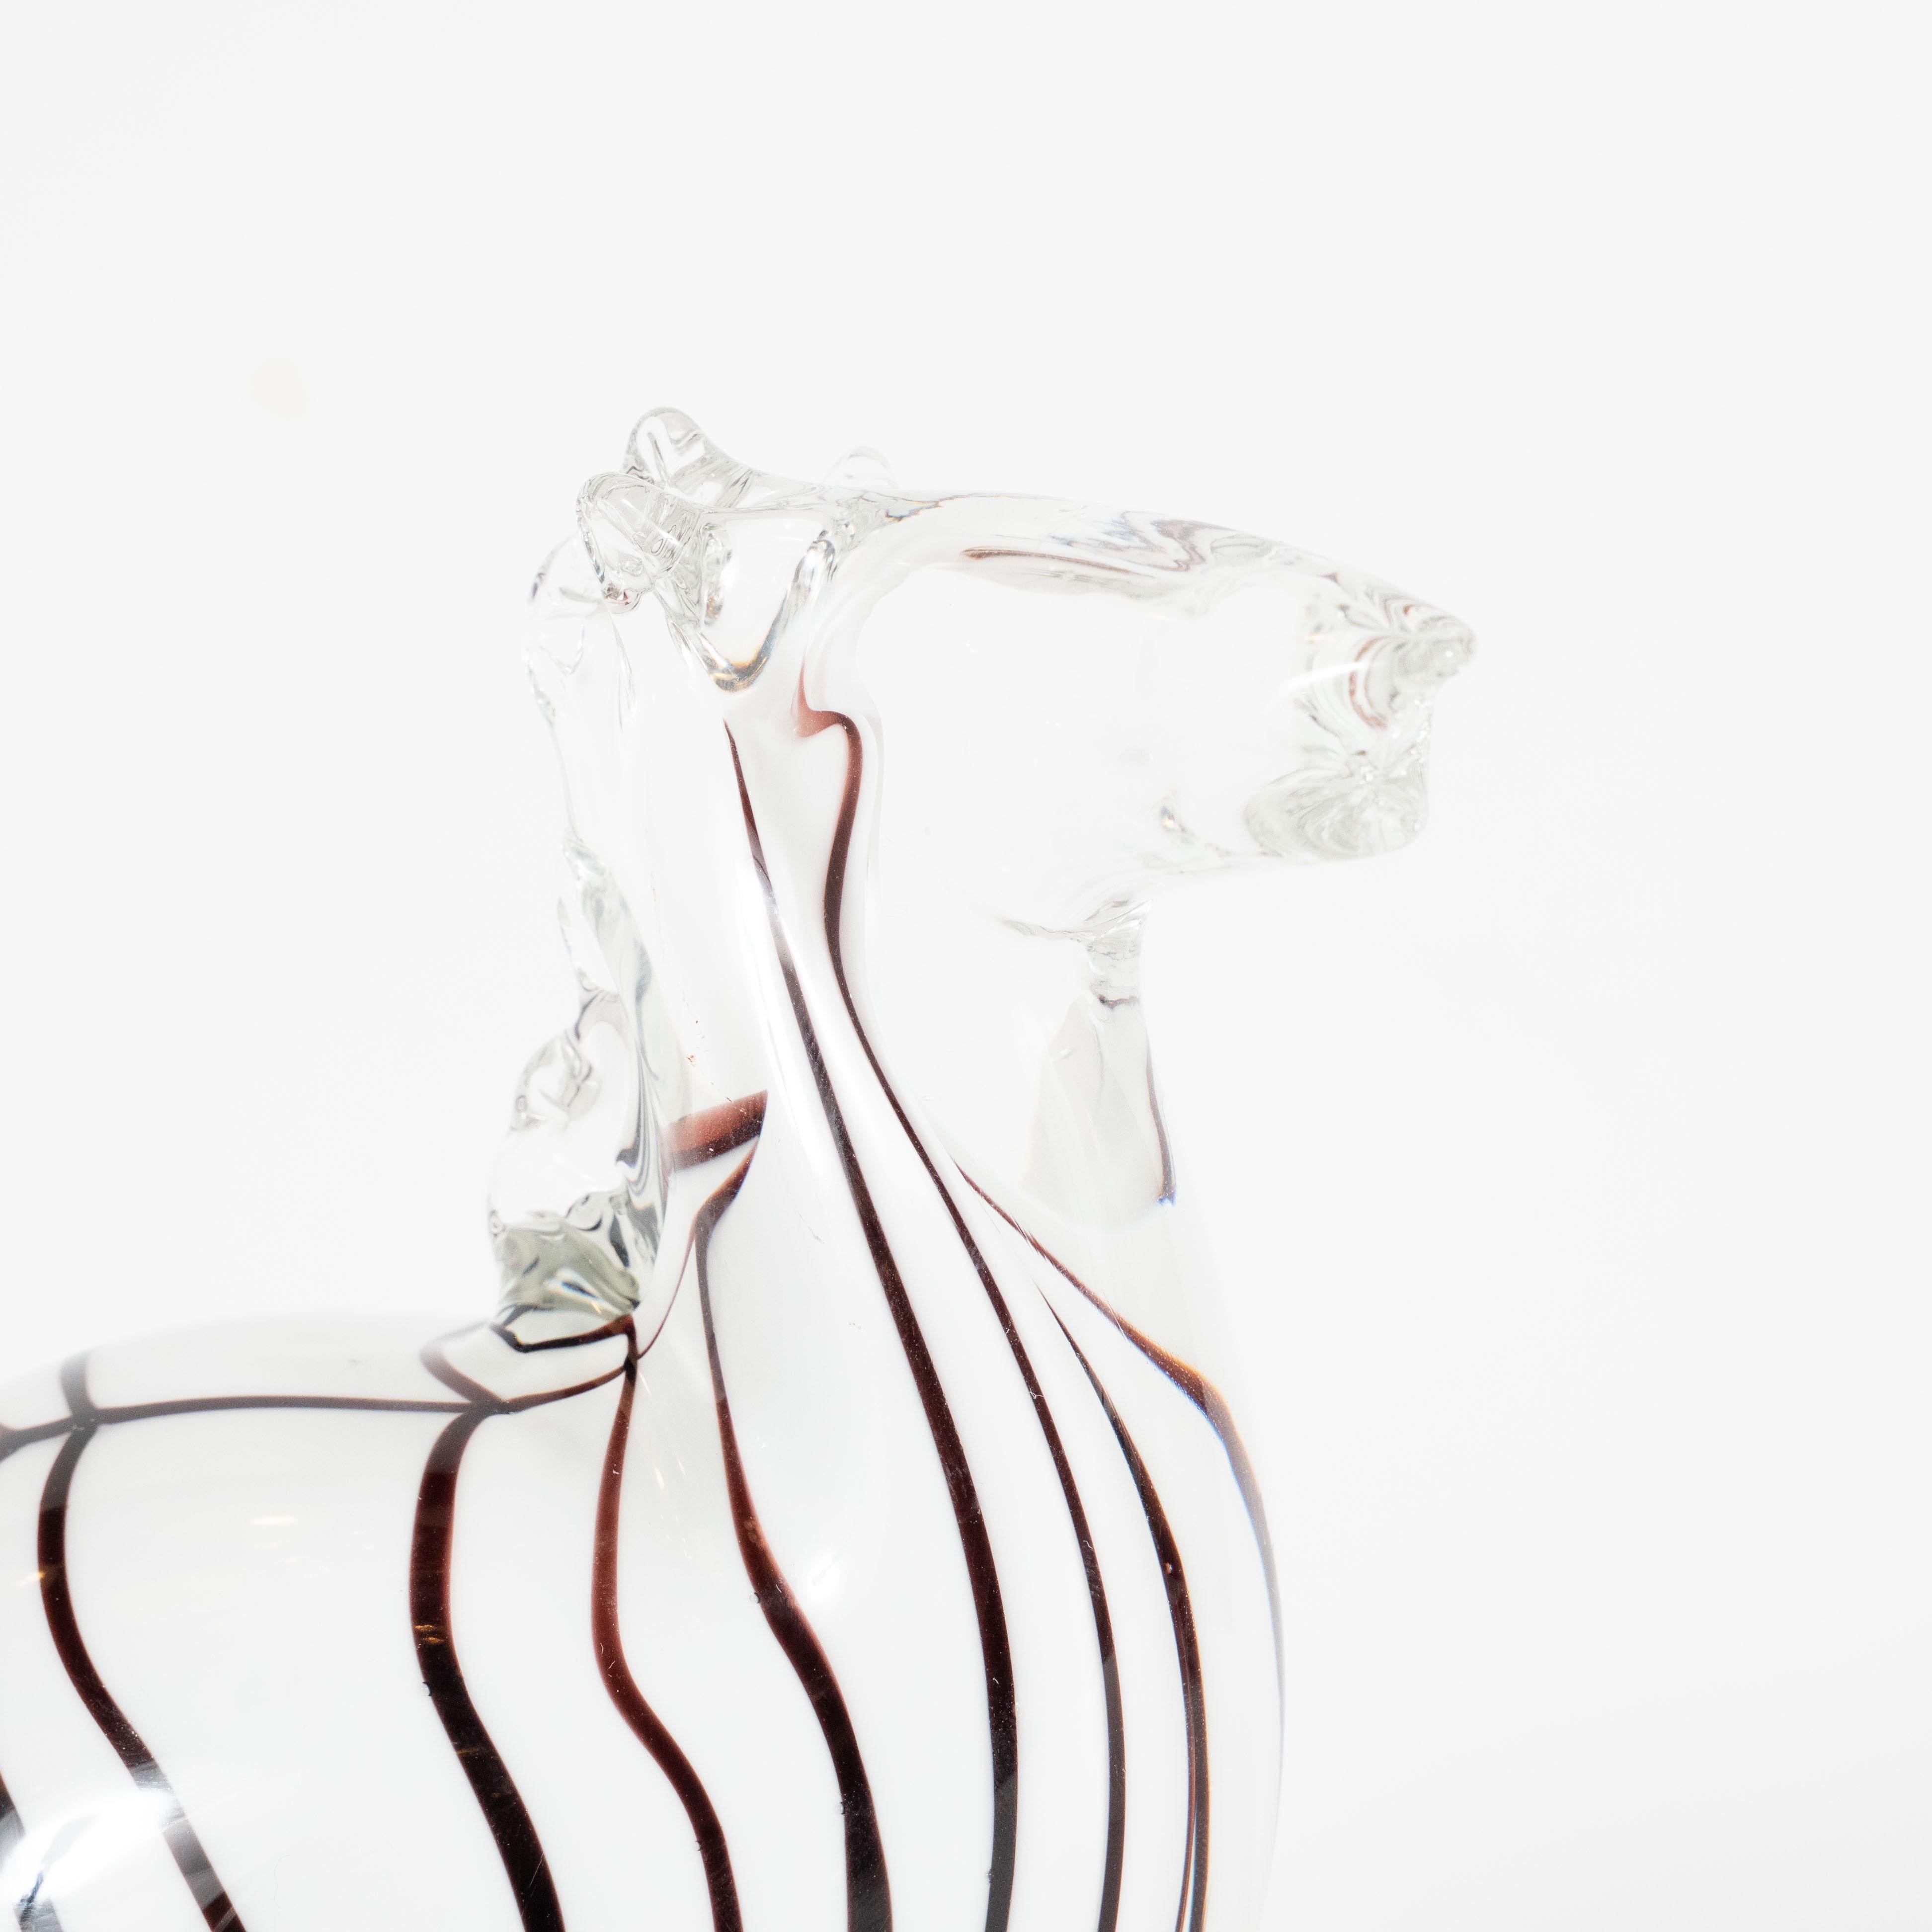 This whimsical, yet refined, Mid-Century Modern decorative object in the form of a stylized zebra was realized in Murano, Italy- the island off the coast of Venice renowned for centuries for its superlative glass production, circa 1960. It presents